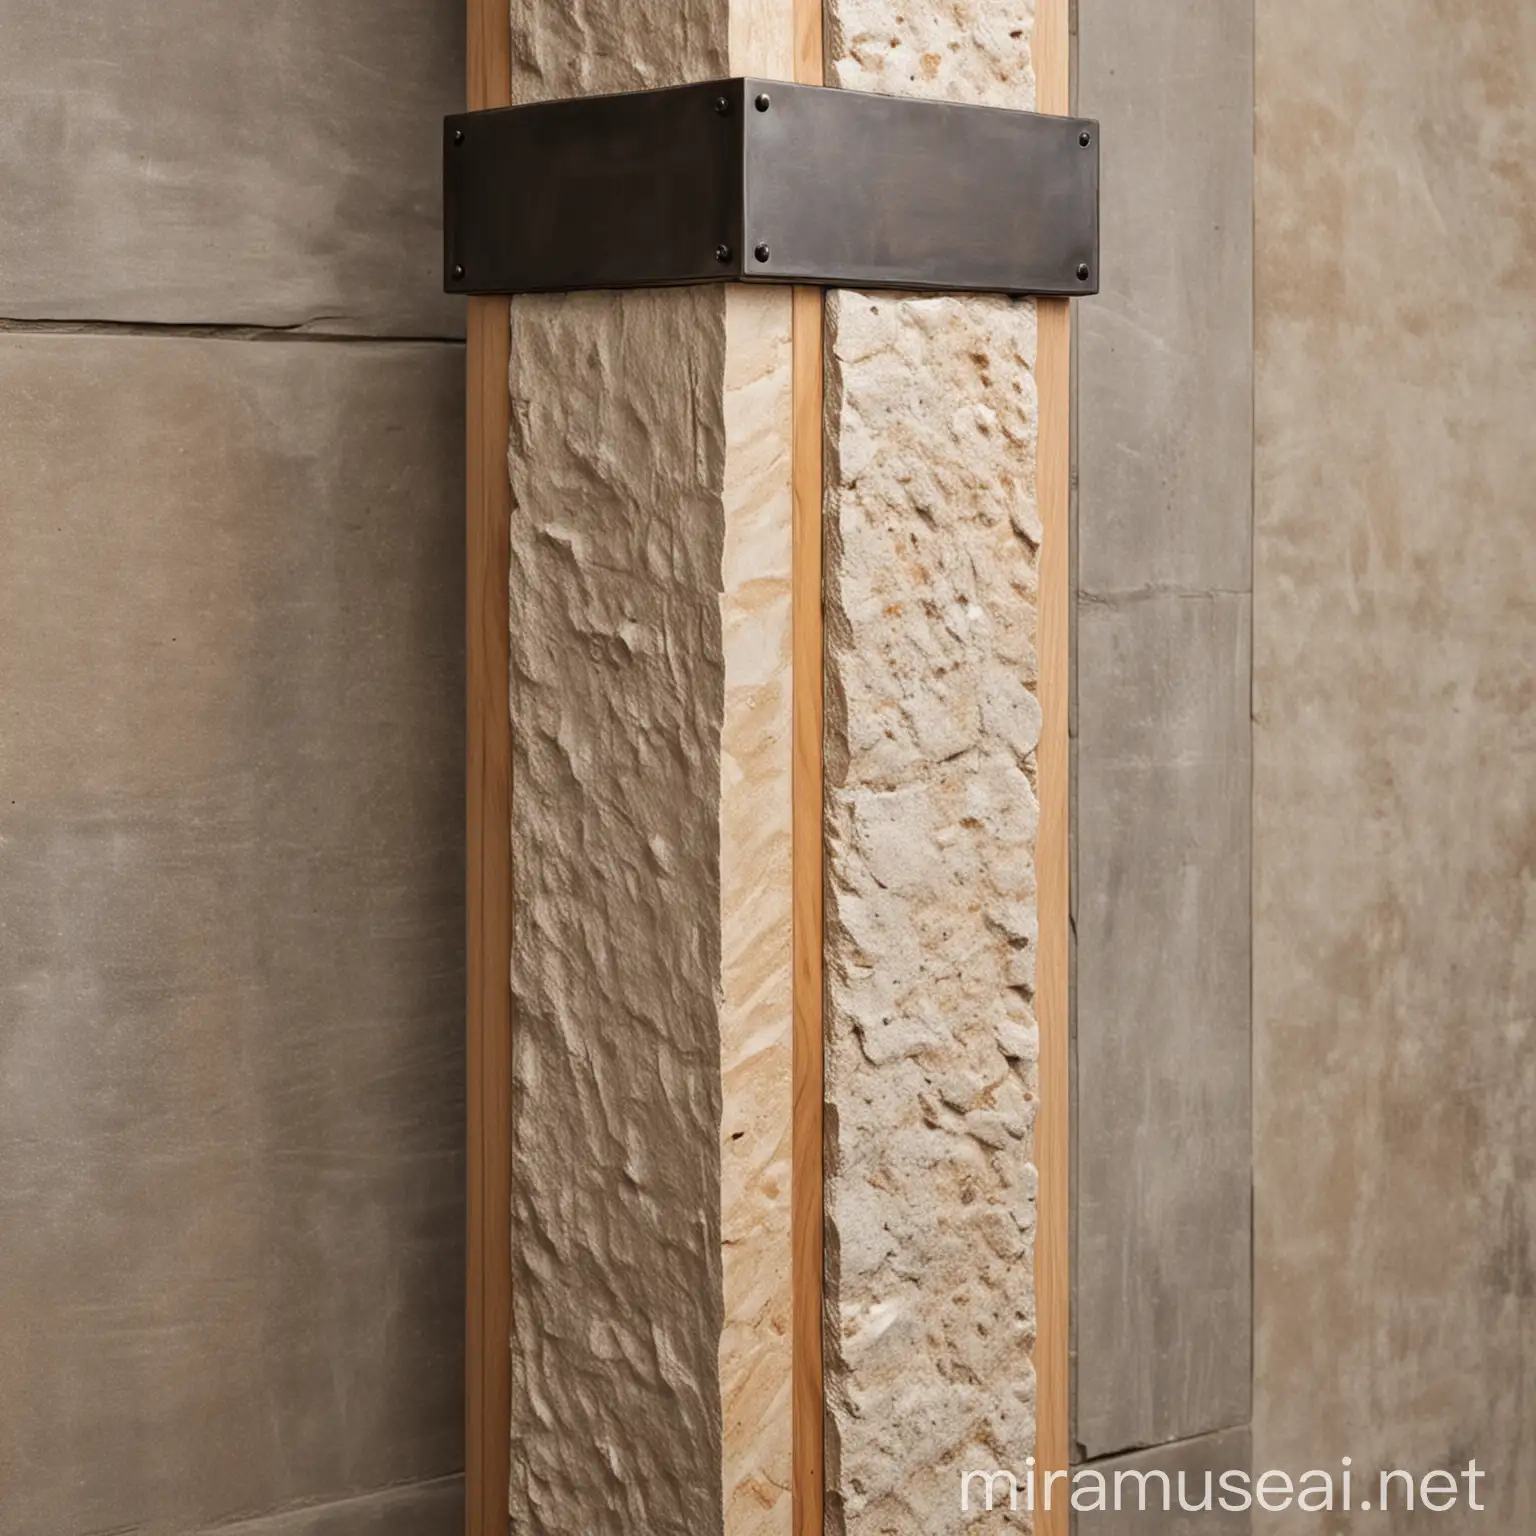 create an image of an architectural column detail with stone and timber and metal trim in a sleek and polished style with interesting joints